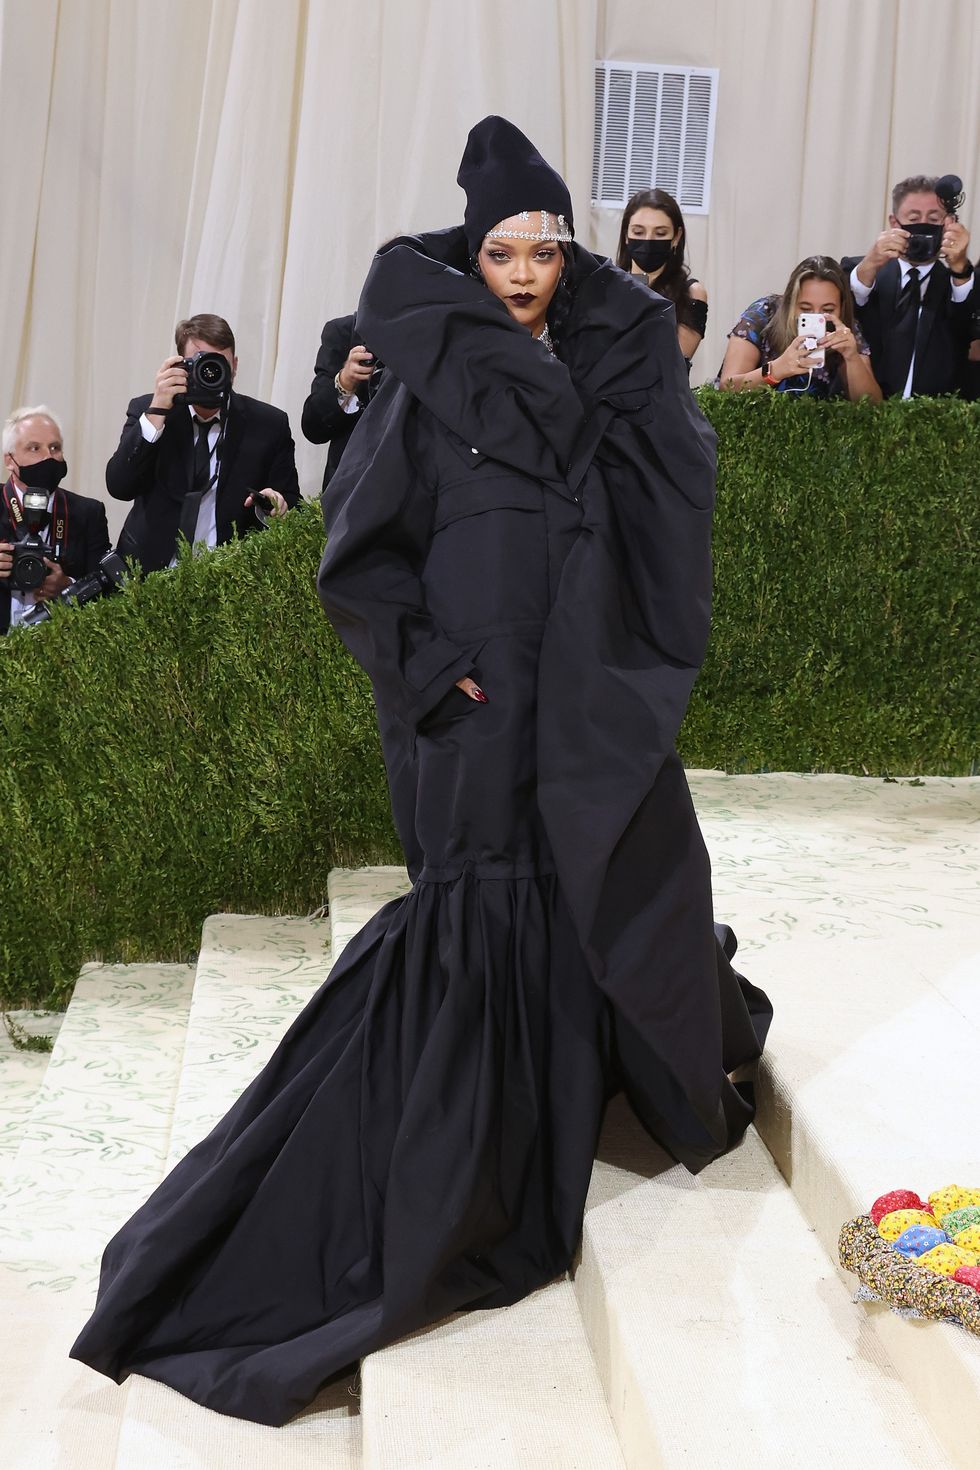 See Photos of the 31 Best- and Worst-Dressed Celebs at the 2021 Met Gala